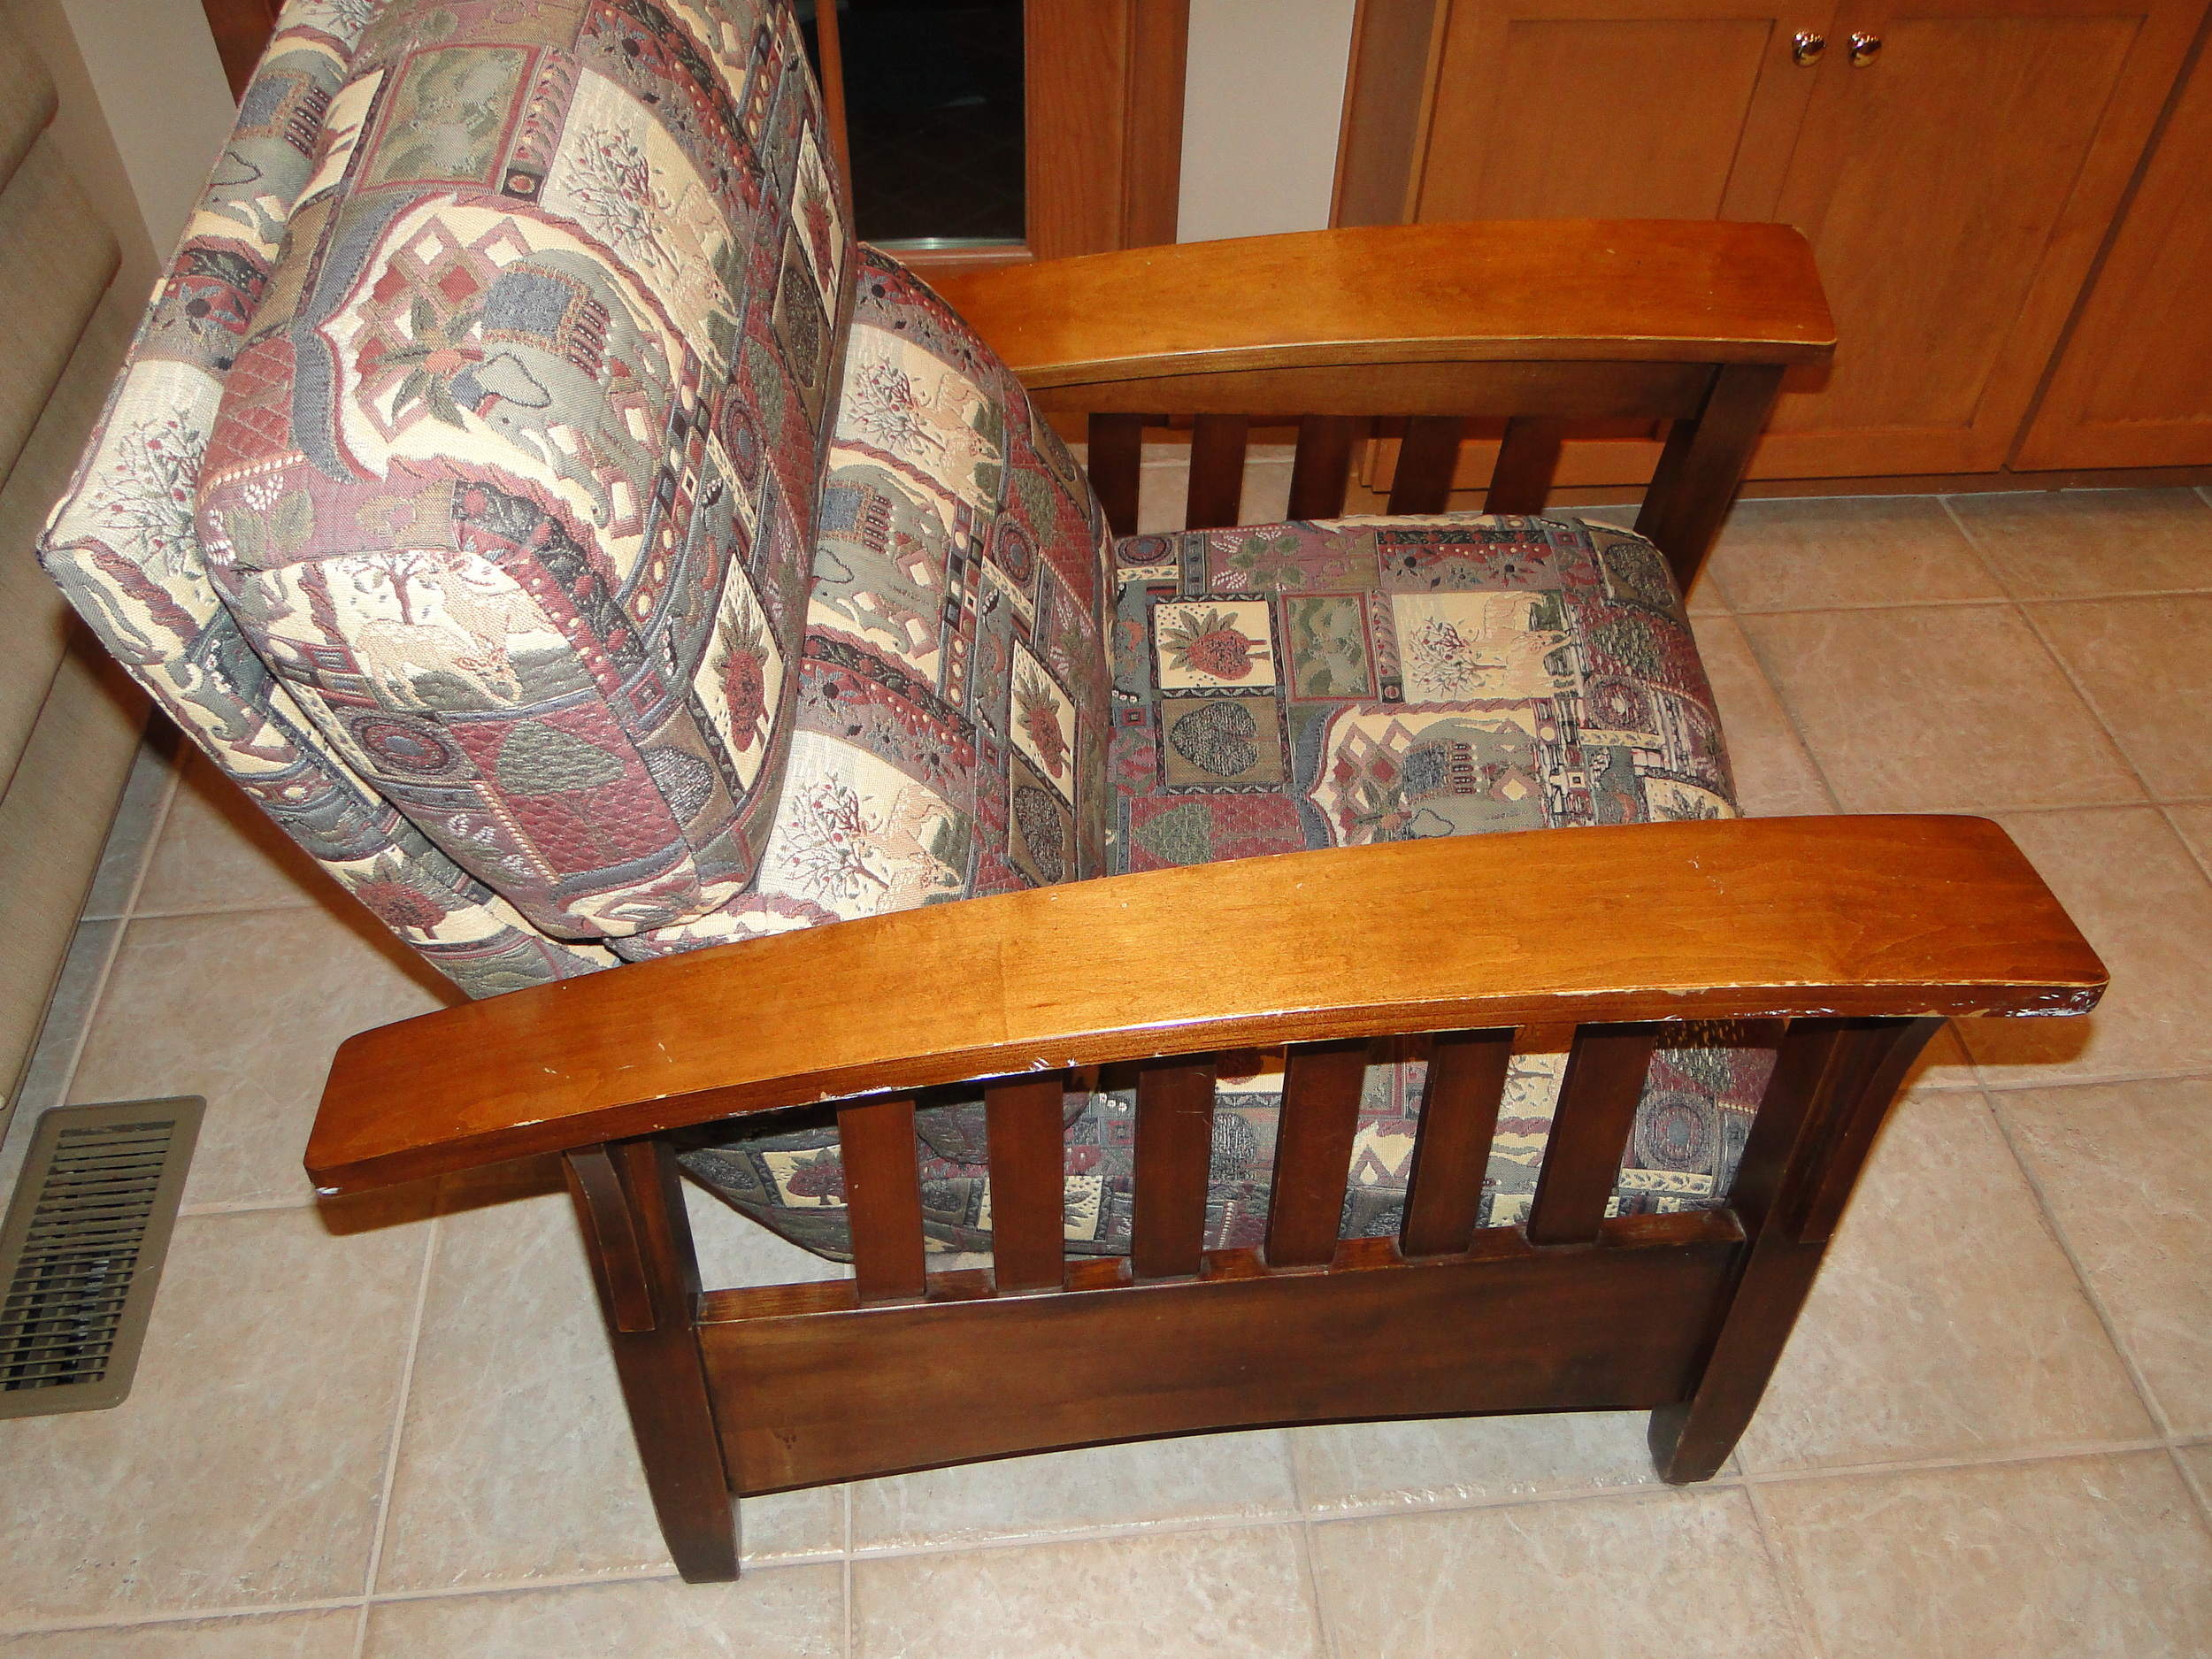 "Before" view with original worn fabric and damaged wood finish